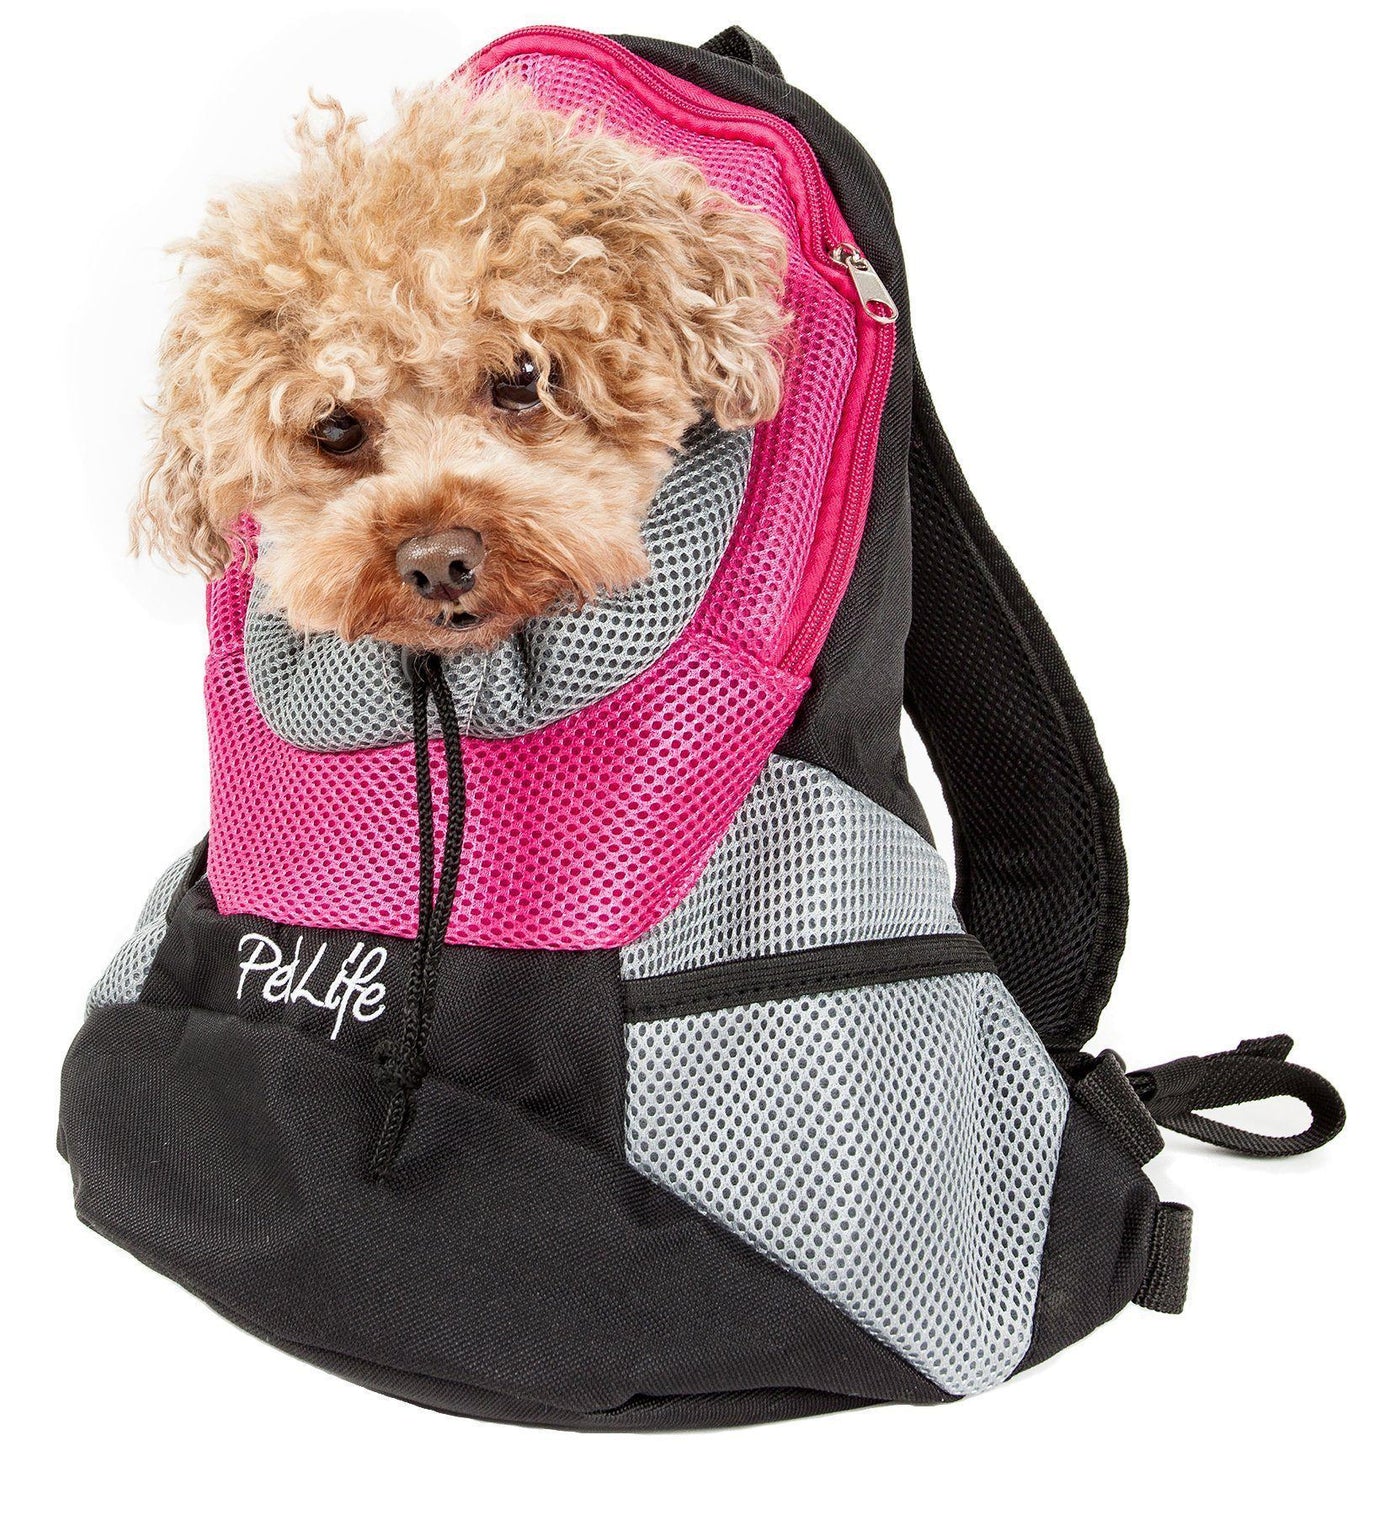 Pet Life Everest Waterproof and Reflective Travel Dog Backpack Harness